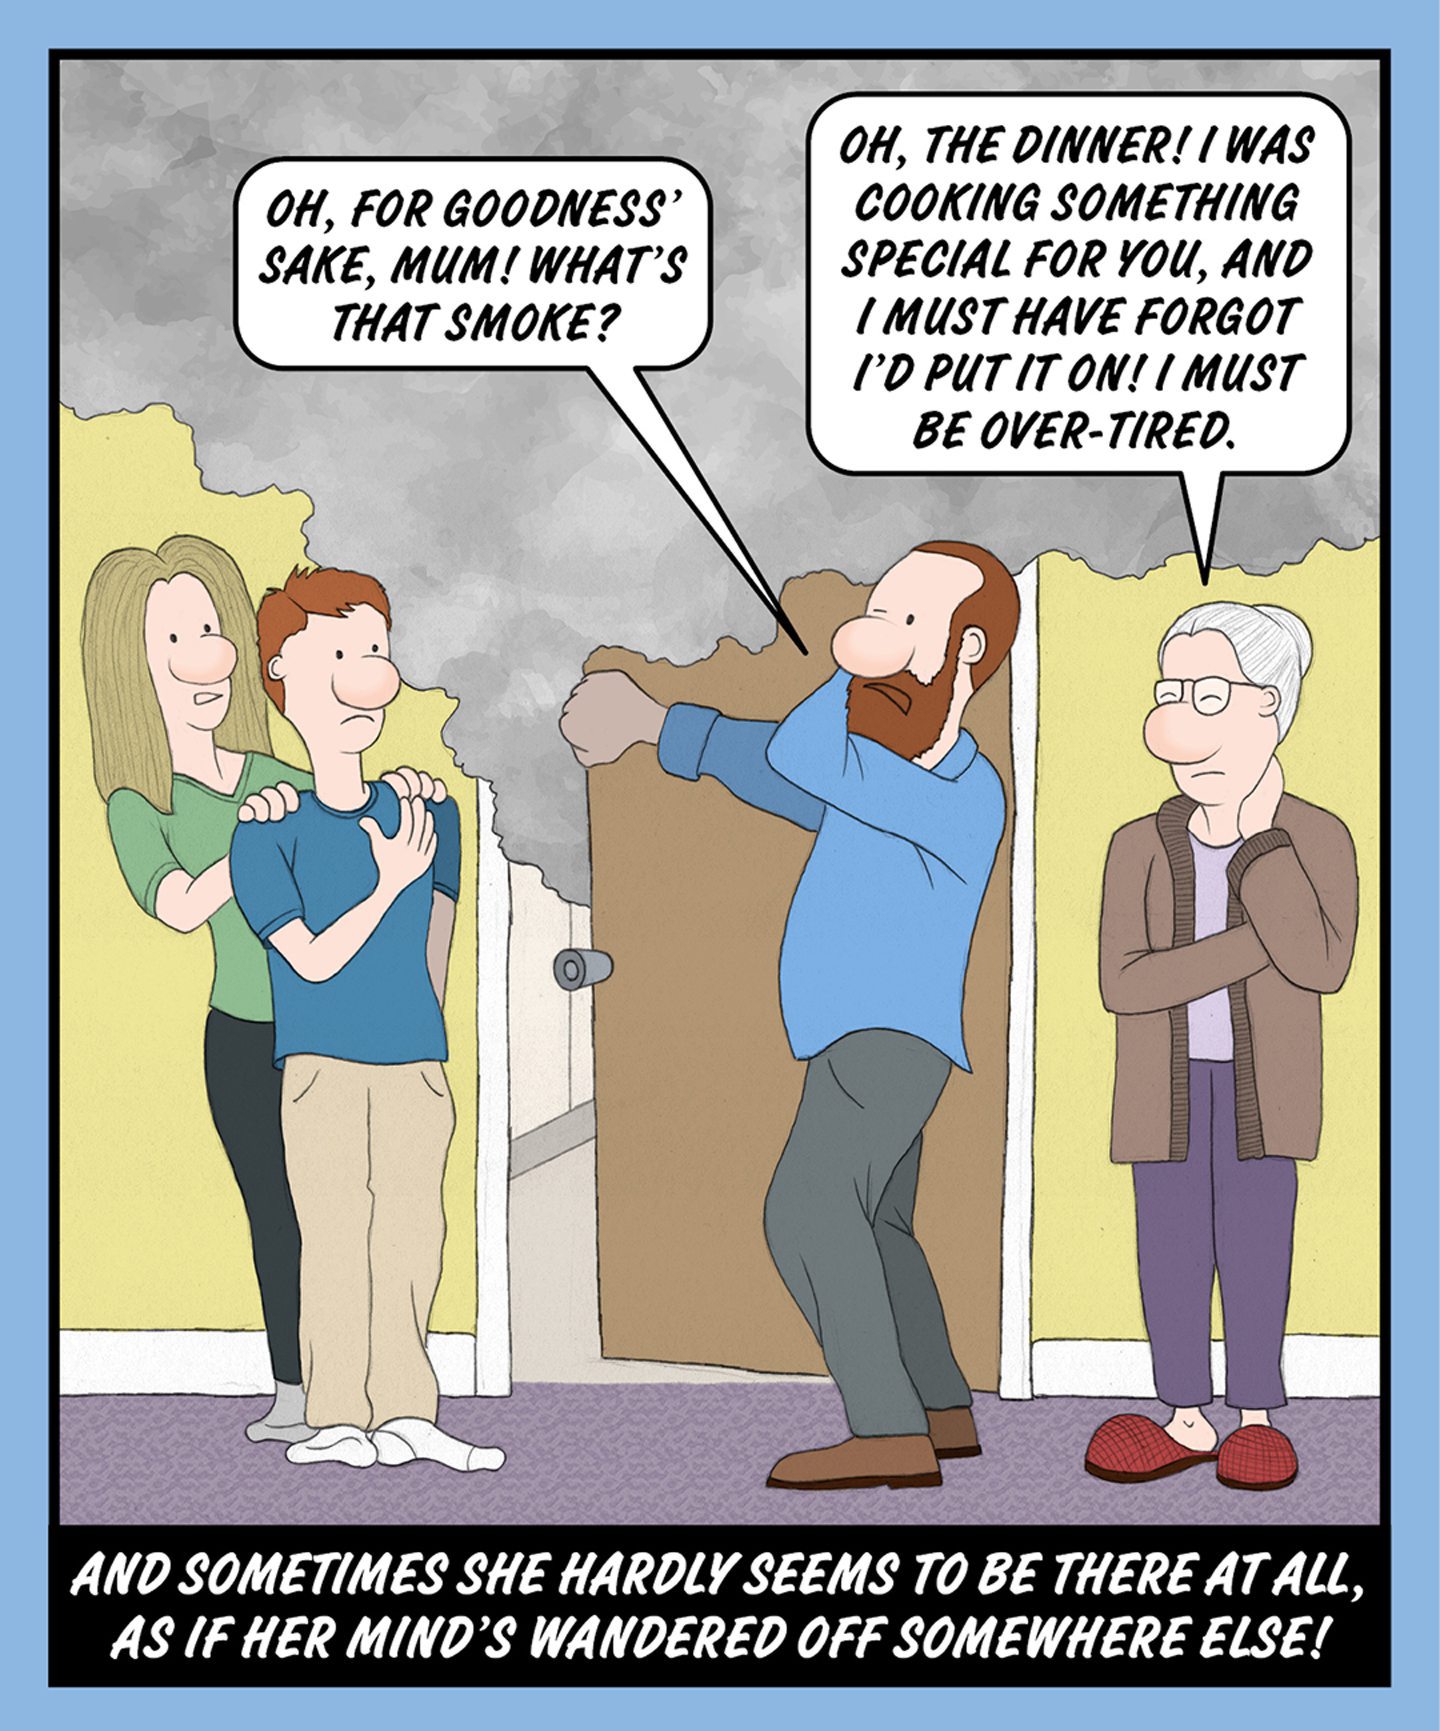 A comic illustration of four people standing behind a door with smoke coming out of it. The speech bubble from the granny reads: OH, THE DINNER! I WAS COOKING SOMETHING SPECIAL FOR YOU, AND I MUST HAVE FORGOT I'D PUT IT ON! I MUST BE OVER-TIRED. The speech bubble from the older man reads: OH, FOR GOODNESS' SAKE, MUM! WHAT'S THAT SMOKE? The text below the image reads: AND SOMETIMES SHE HARDLY SEEMS TO BE THERE AT ALL, AS IF HER MIND'S WANDERED OFF SOMEWHERE ELSE!